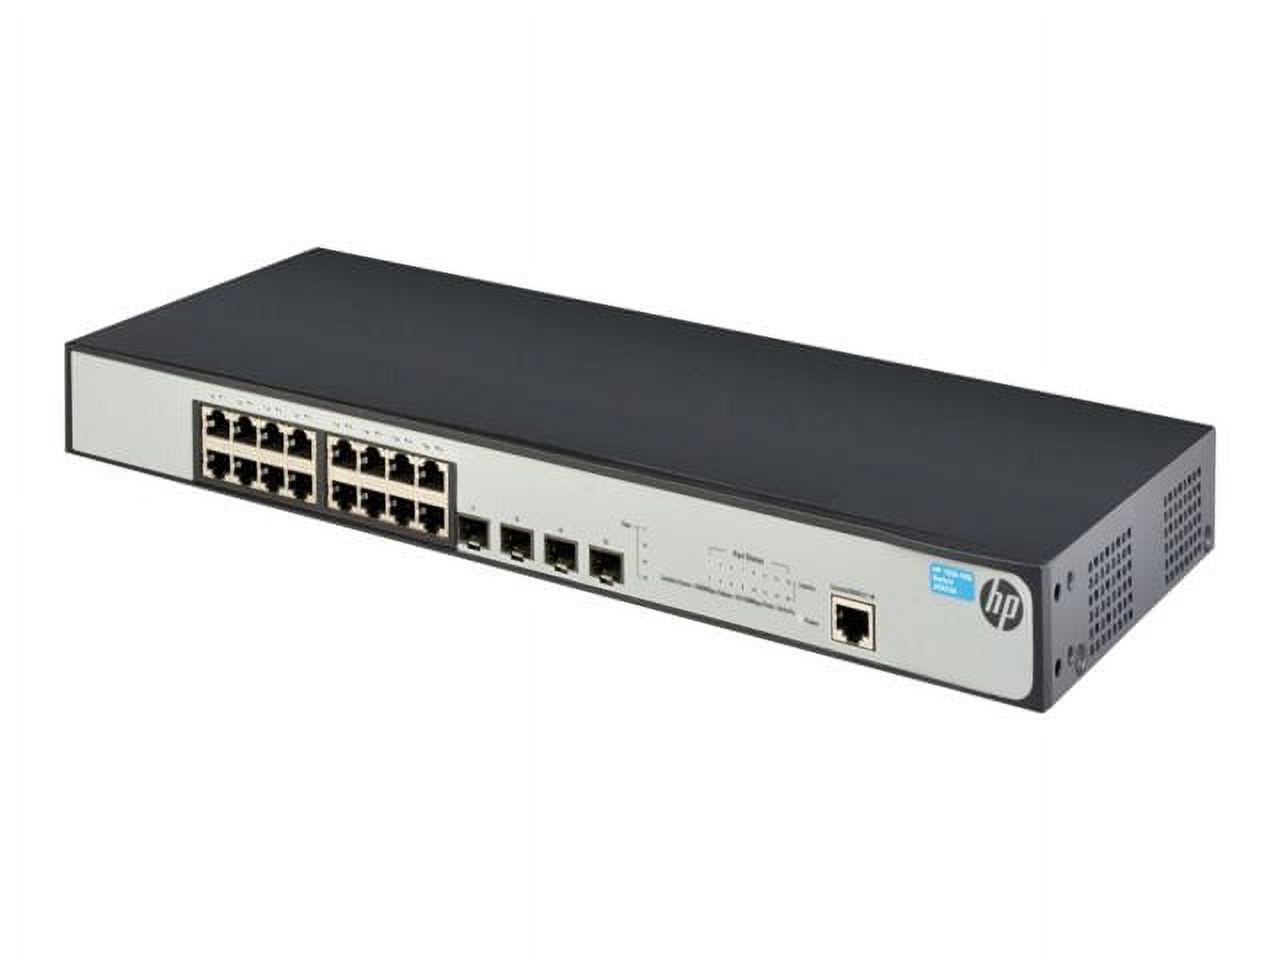 HPE Networking BTO - JG923A#ABA - HP 1920-16G Switch - image 5 of 6